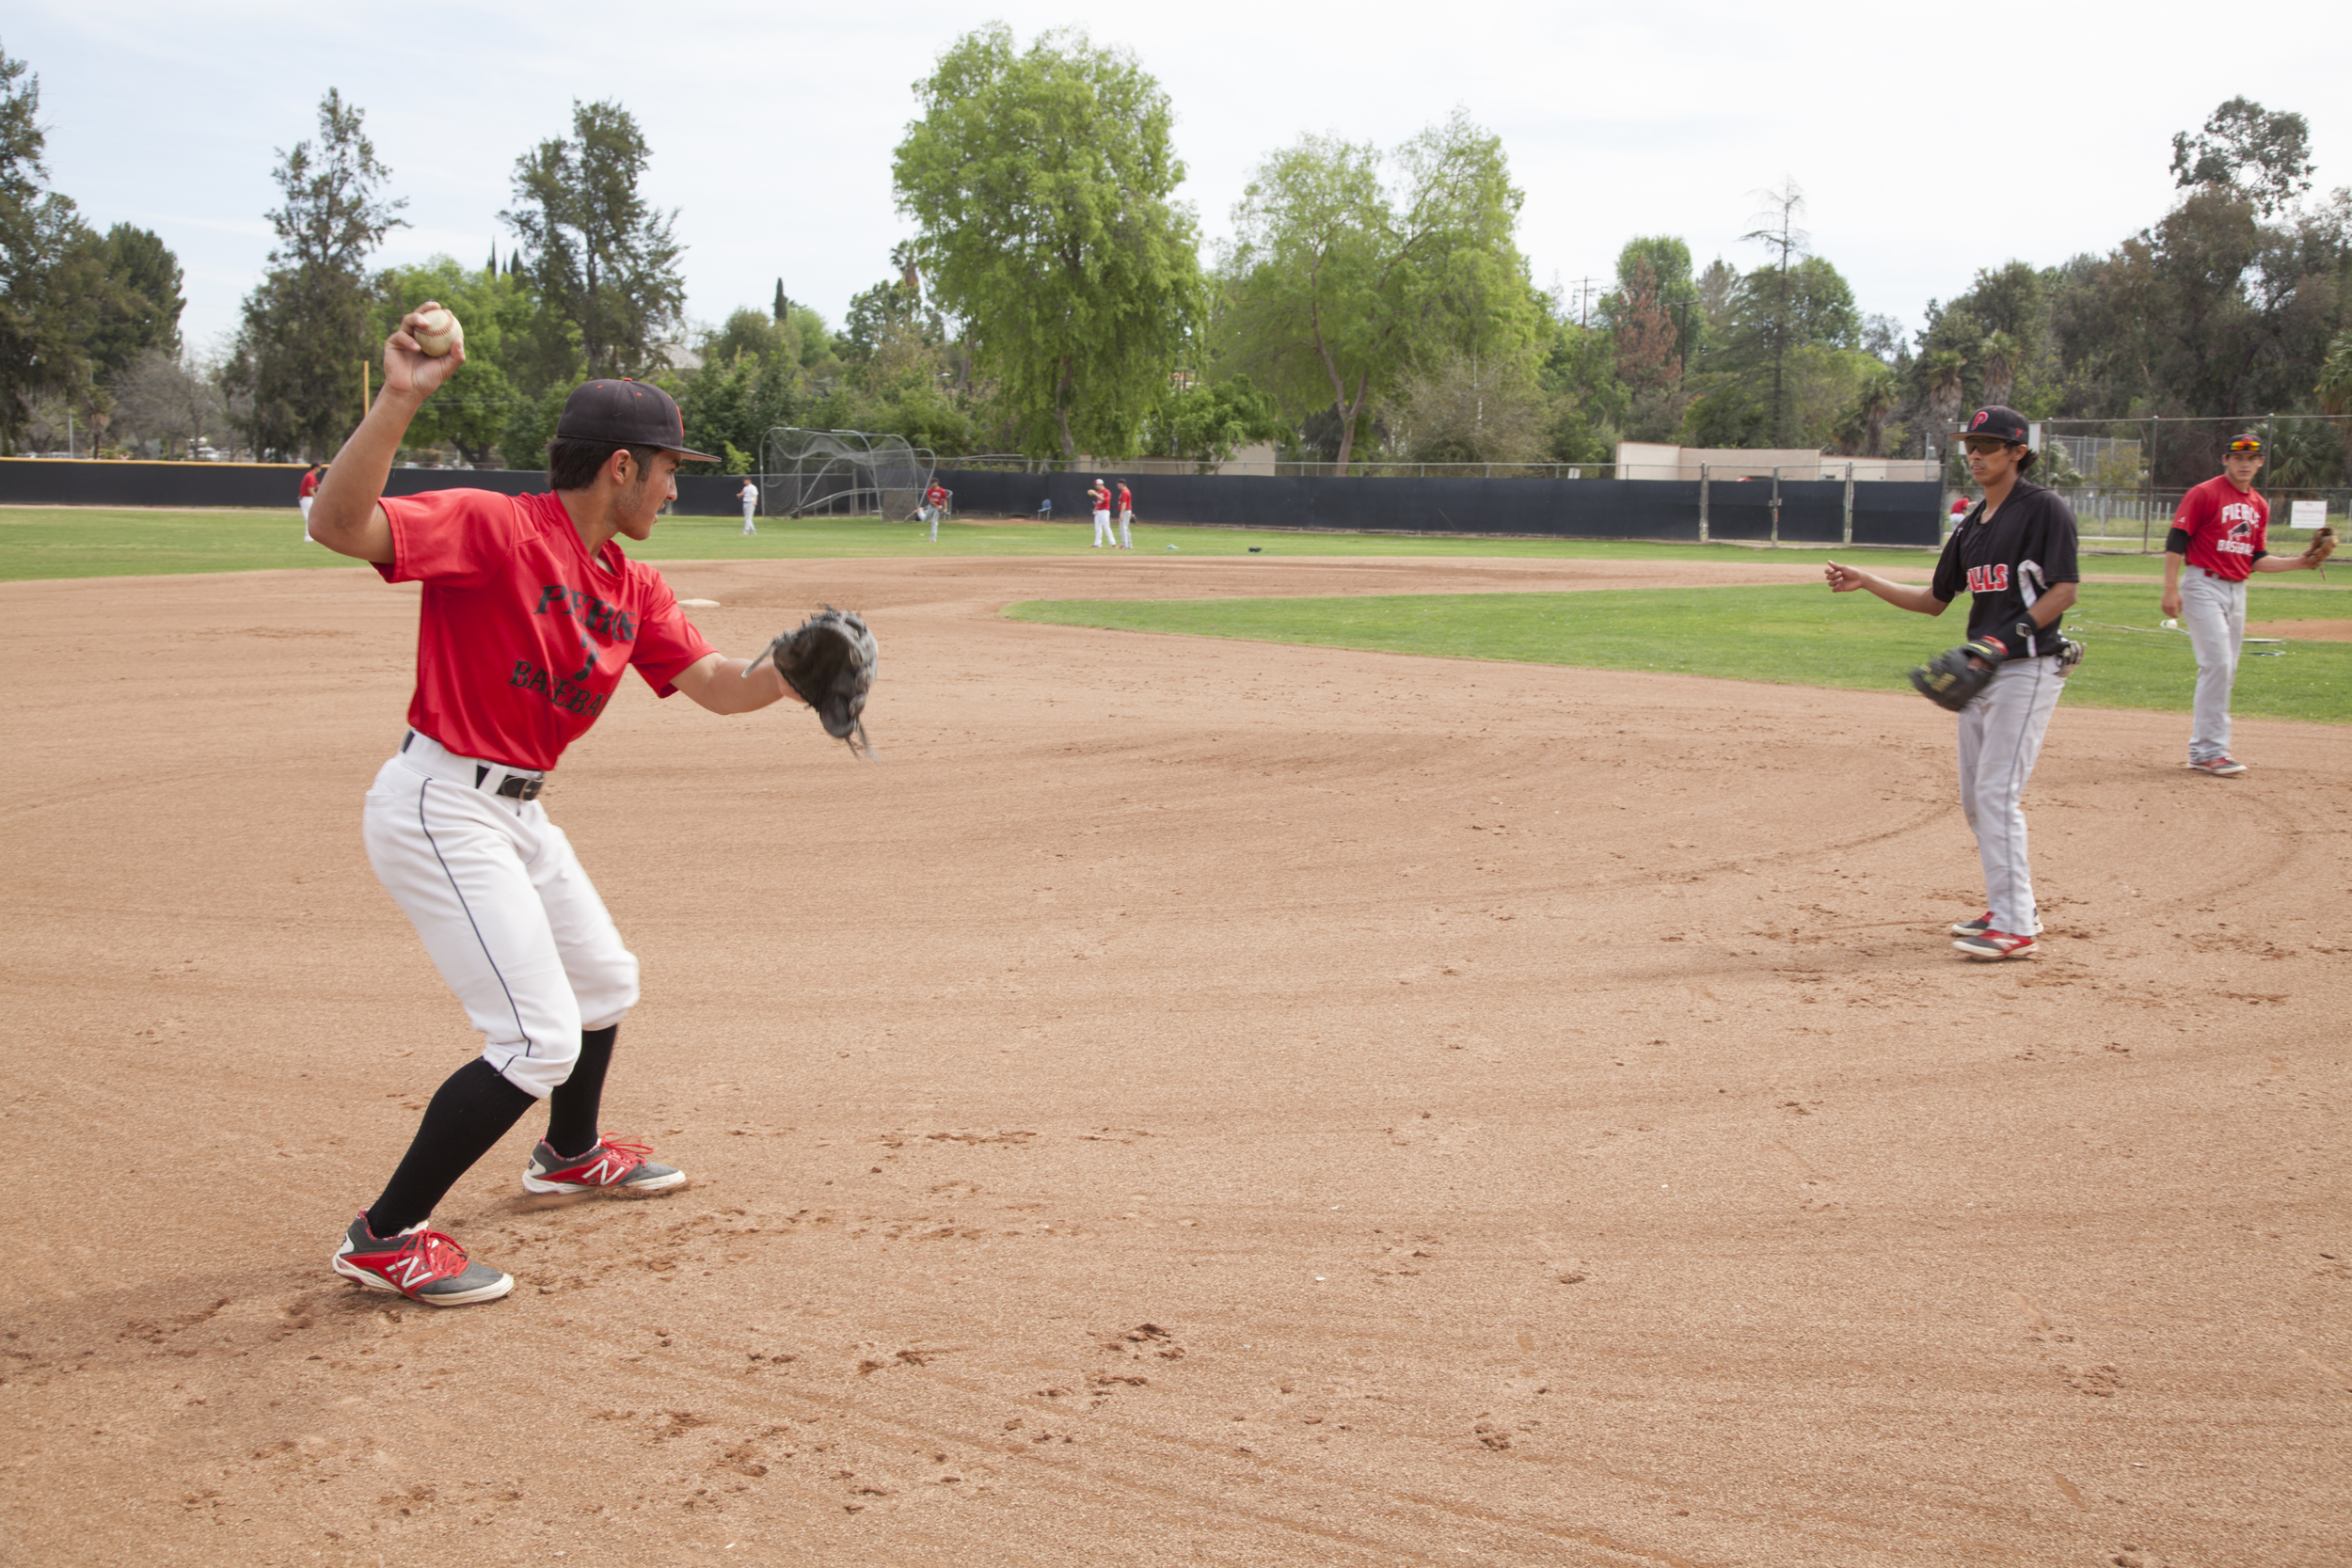  Jordan Abushala and Angel Cruz pair up to perform fielding plays at Joe Kelly Field on Tuesday, March 10, 2015. Woodland Hills, Calif.  Read the full story&nbsp; here  